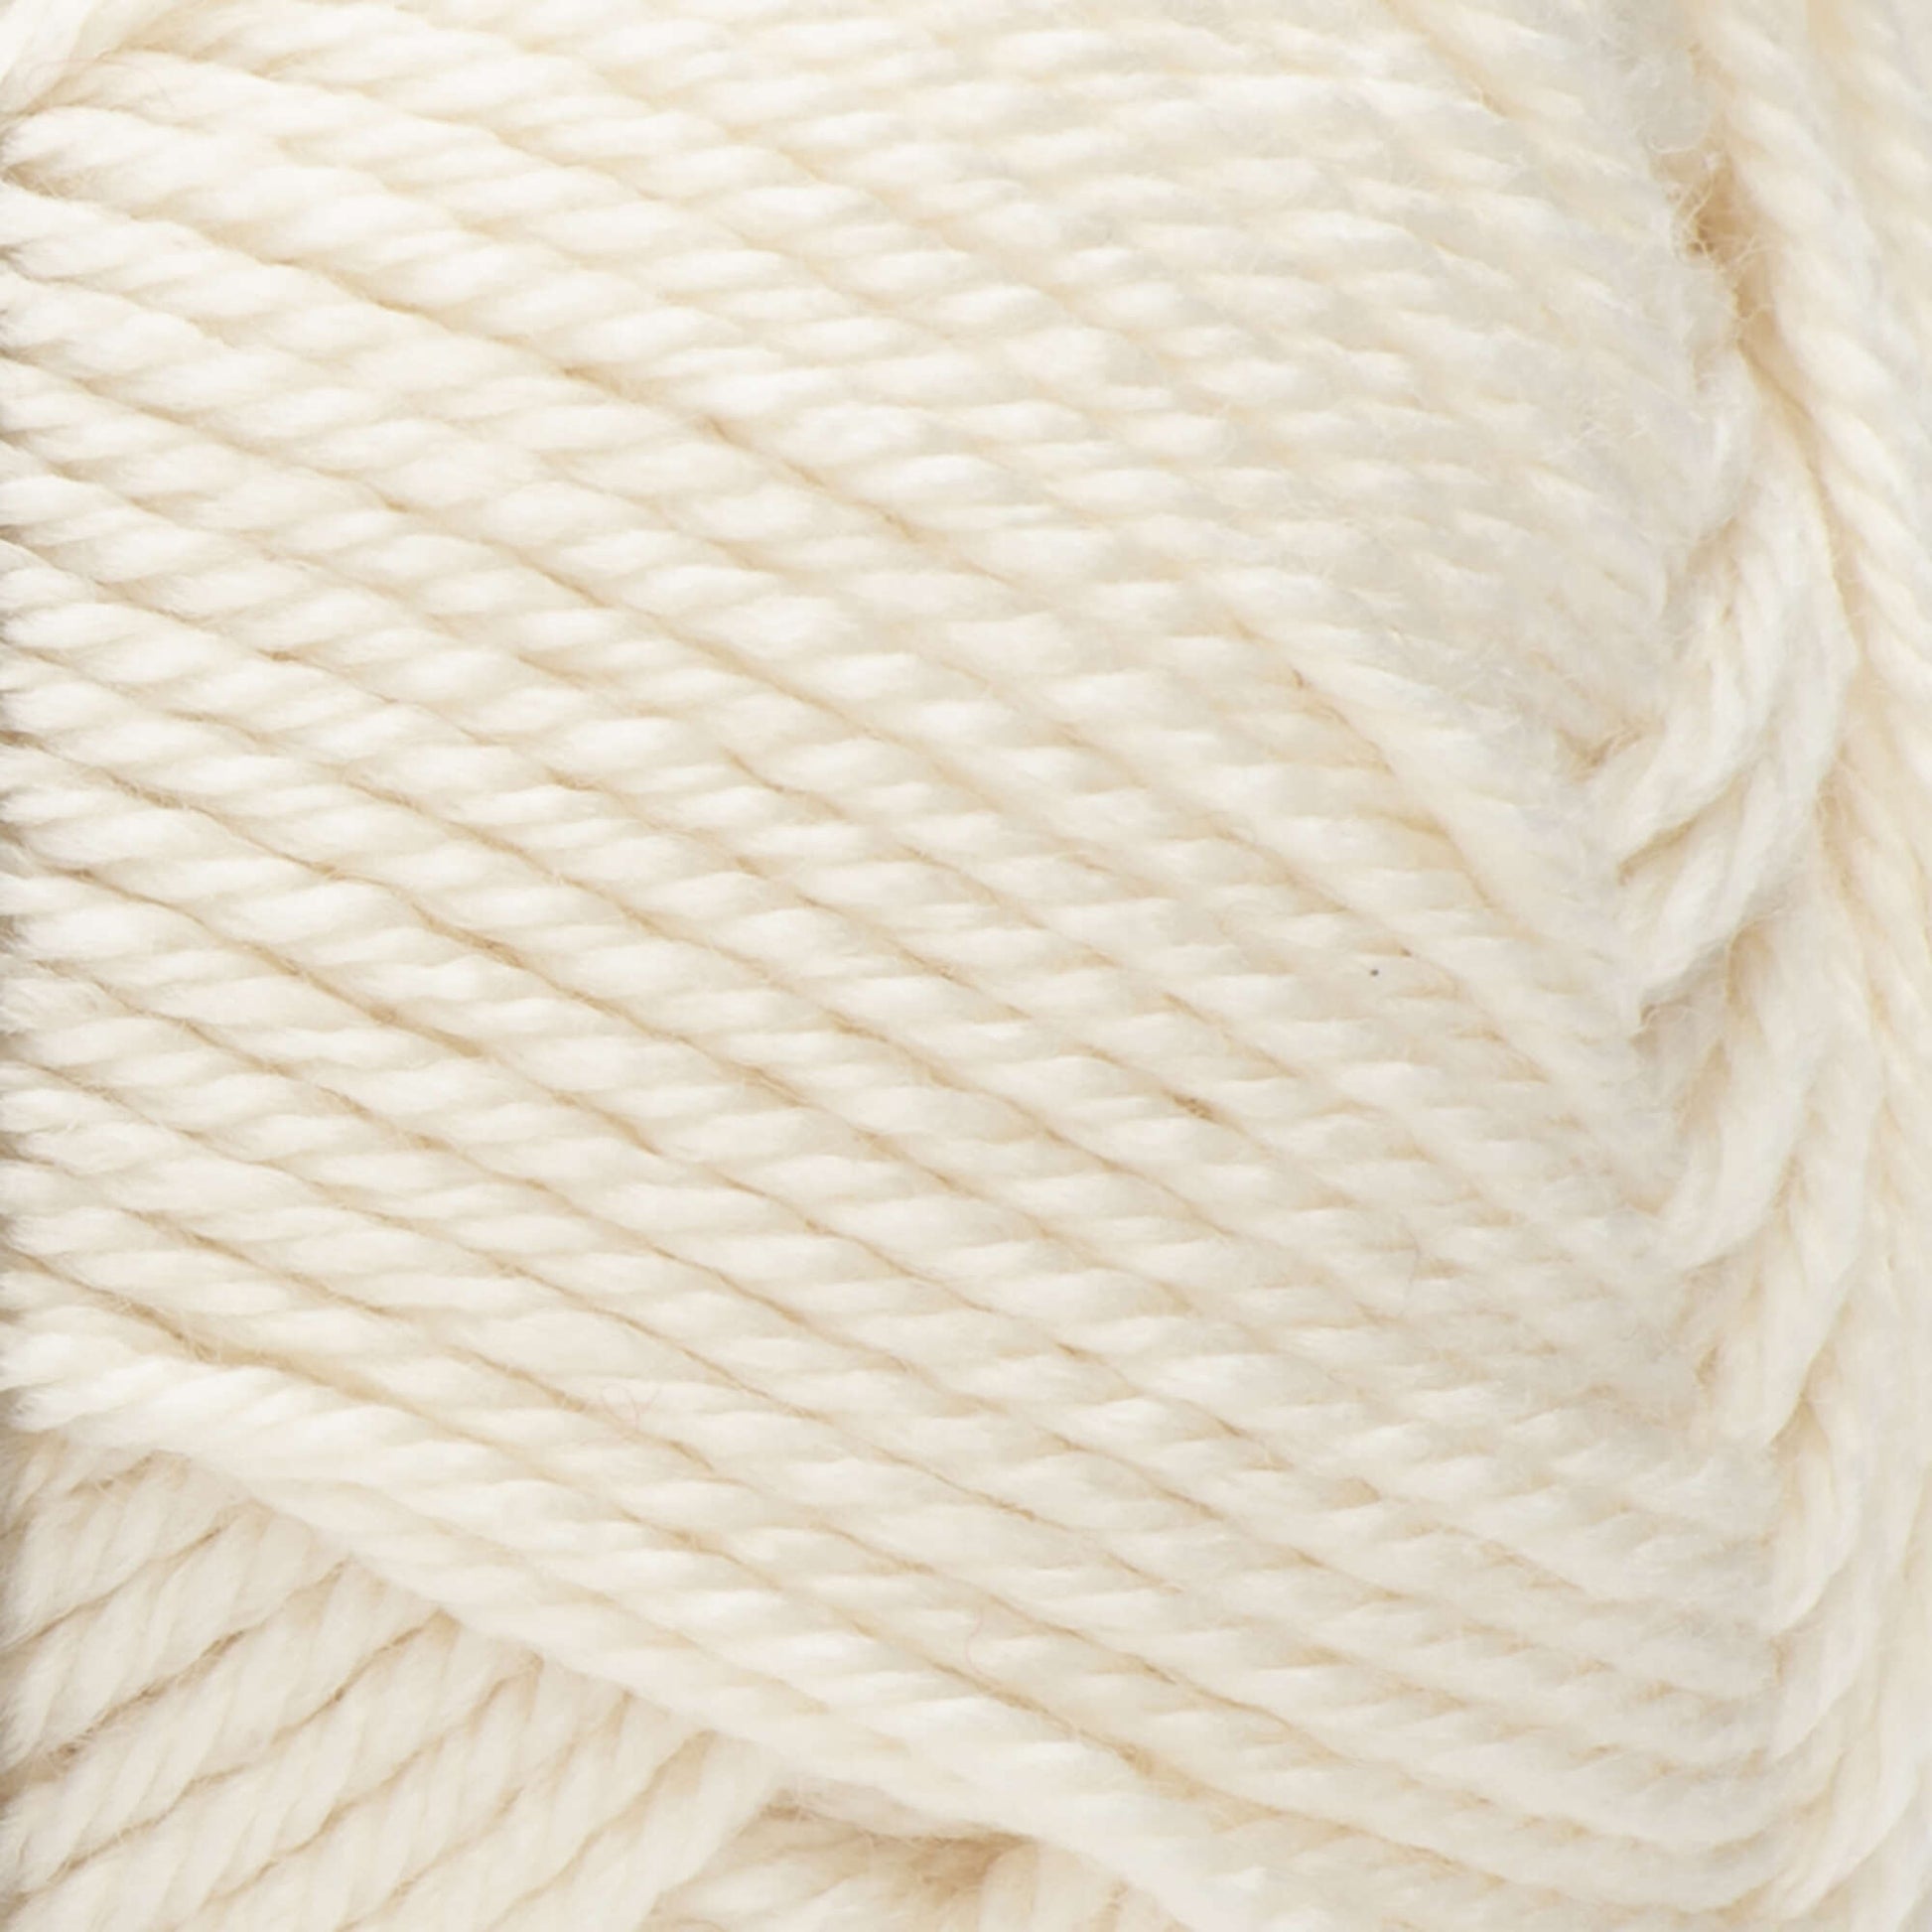 Red Heart Soft Yarn - Discontinued Shades